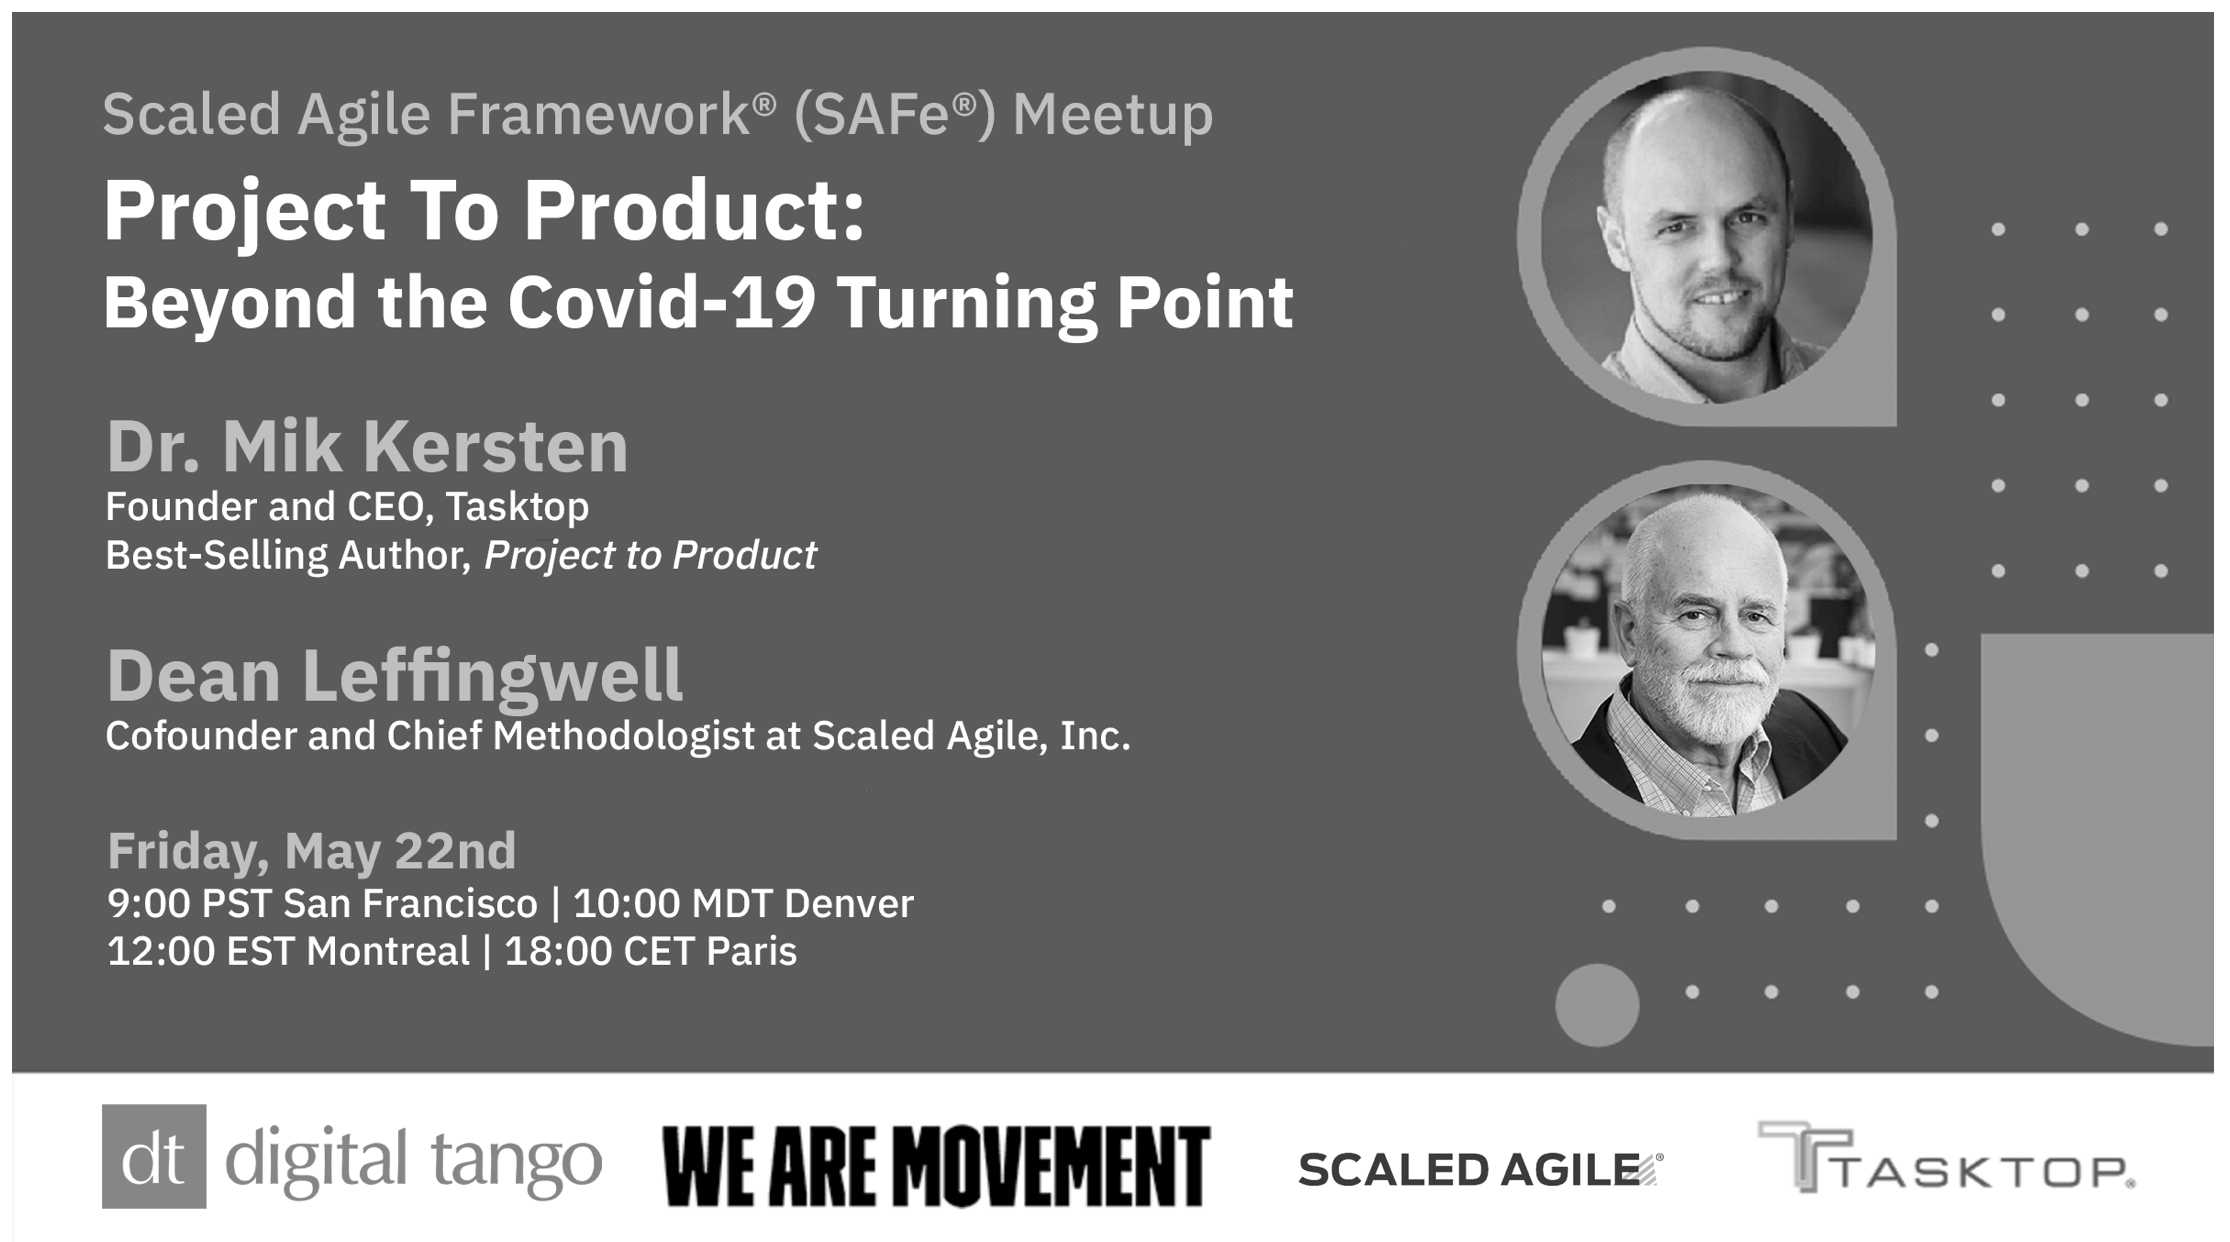 Project to product meetup